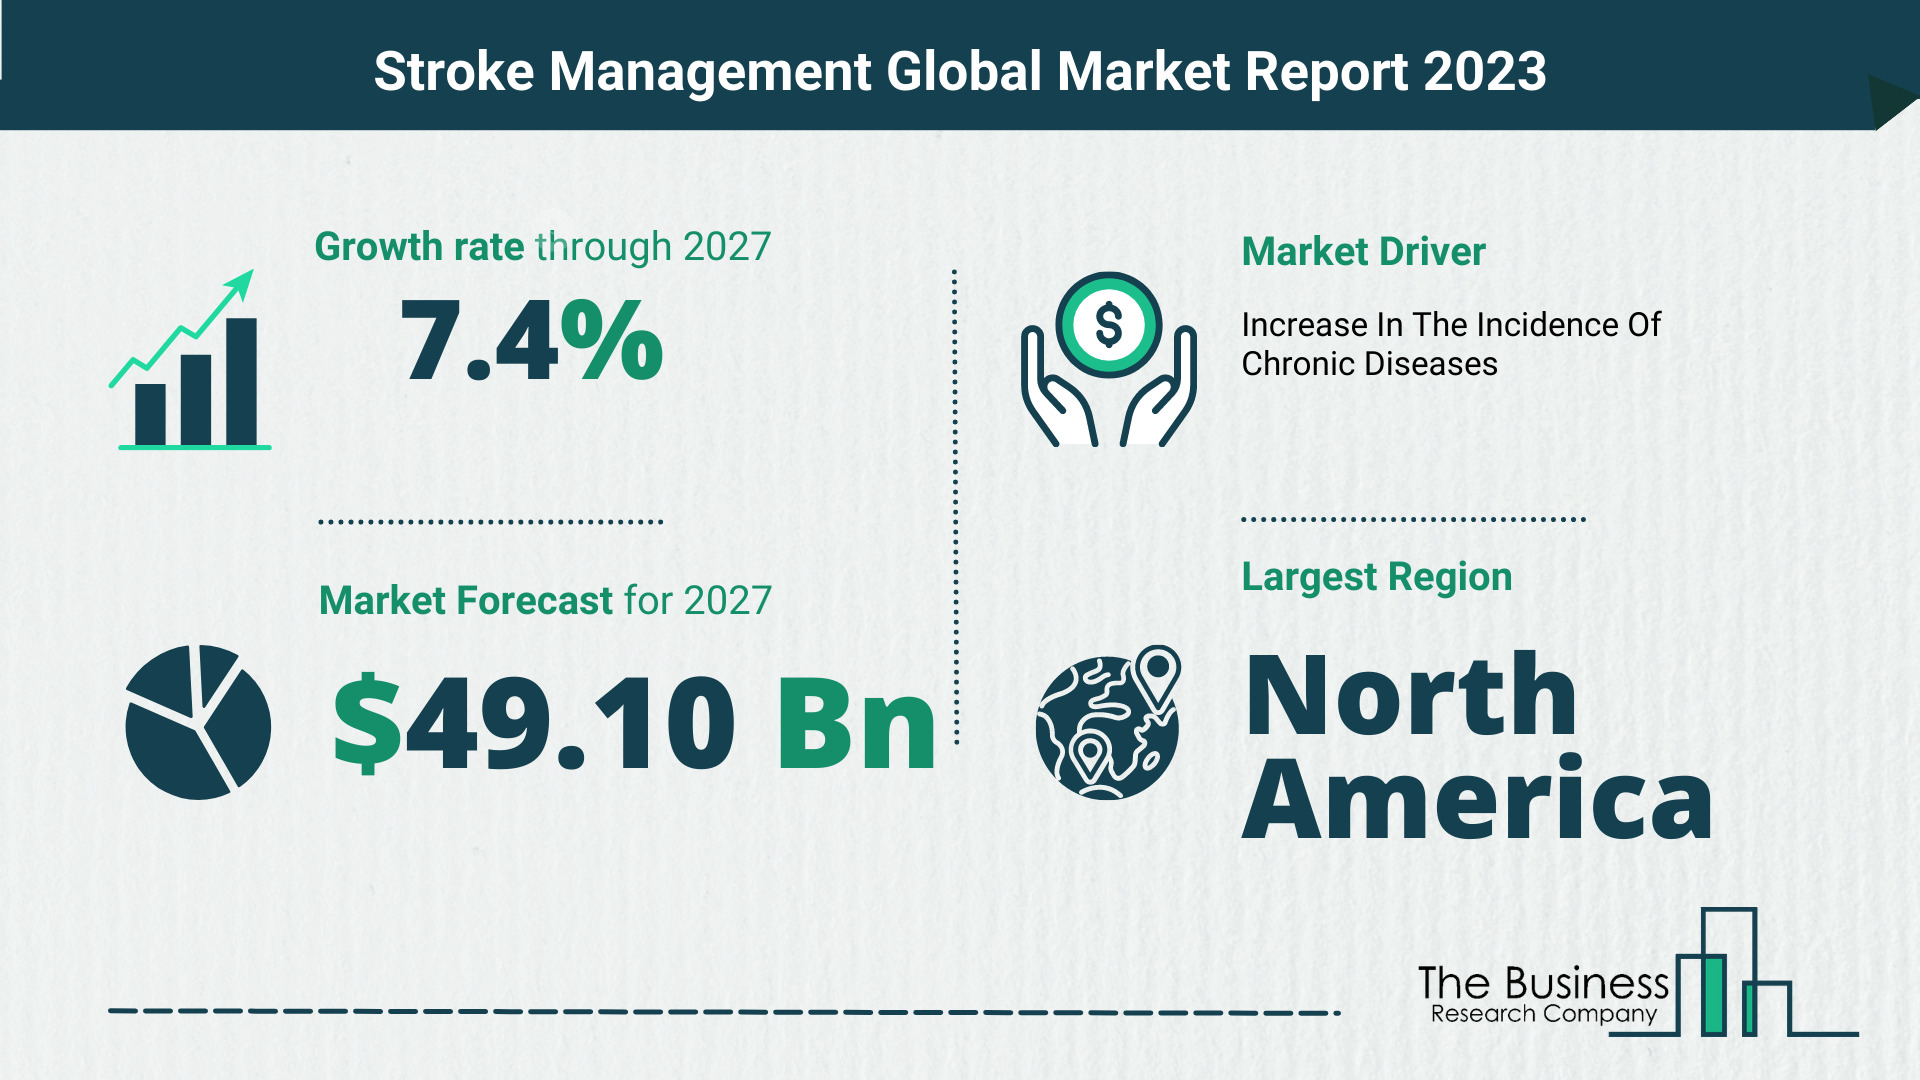 Stroke Management Market Size, Share, And Growth Rate Analysis 2023